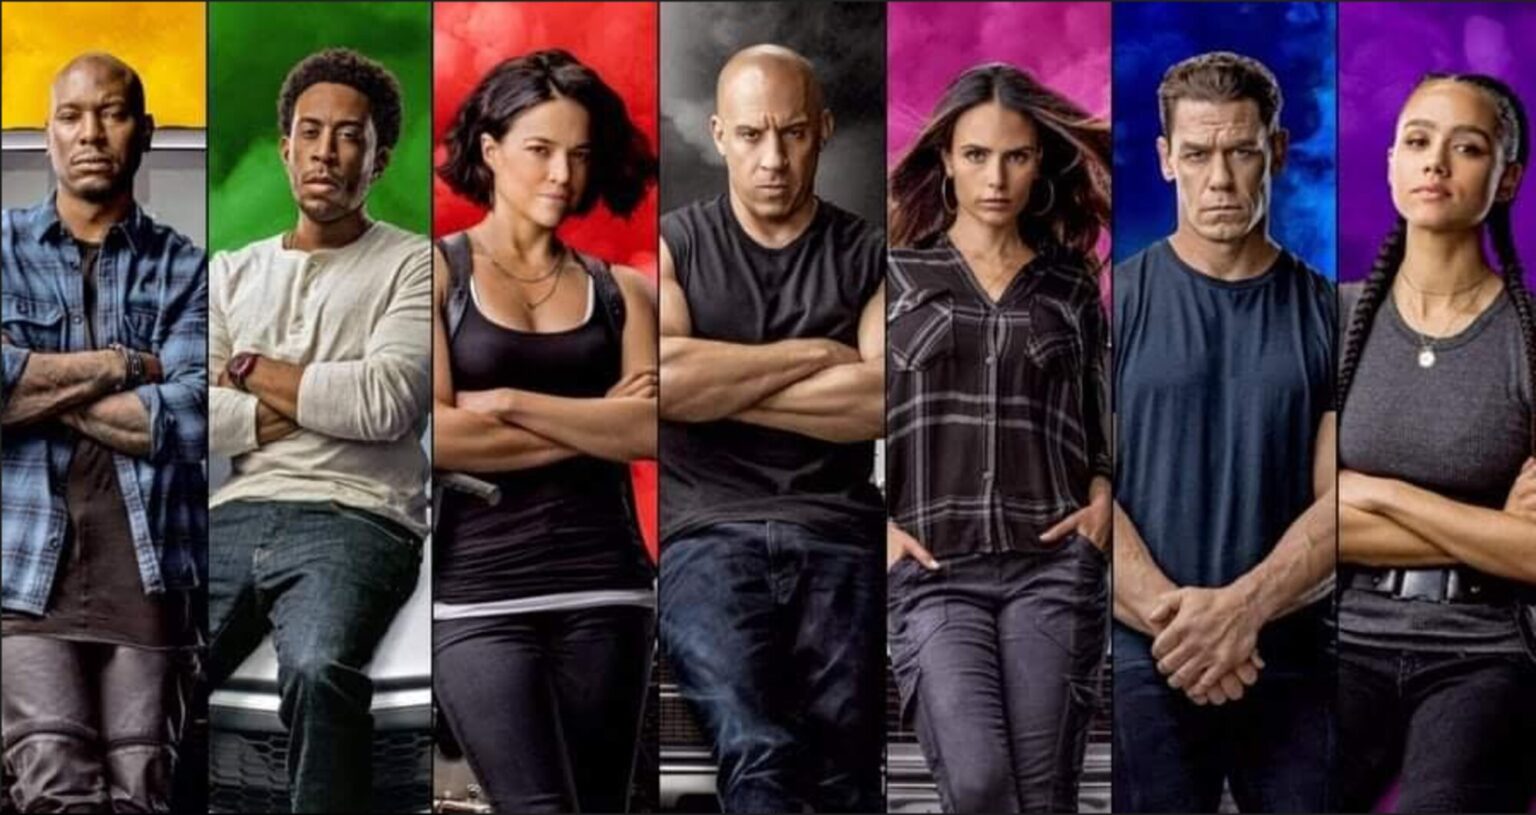 Could the new 'Fast and Furious 9' movie save this franchise? Let's take a look back over the years at just how iconic this franchise has been here.